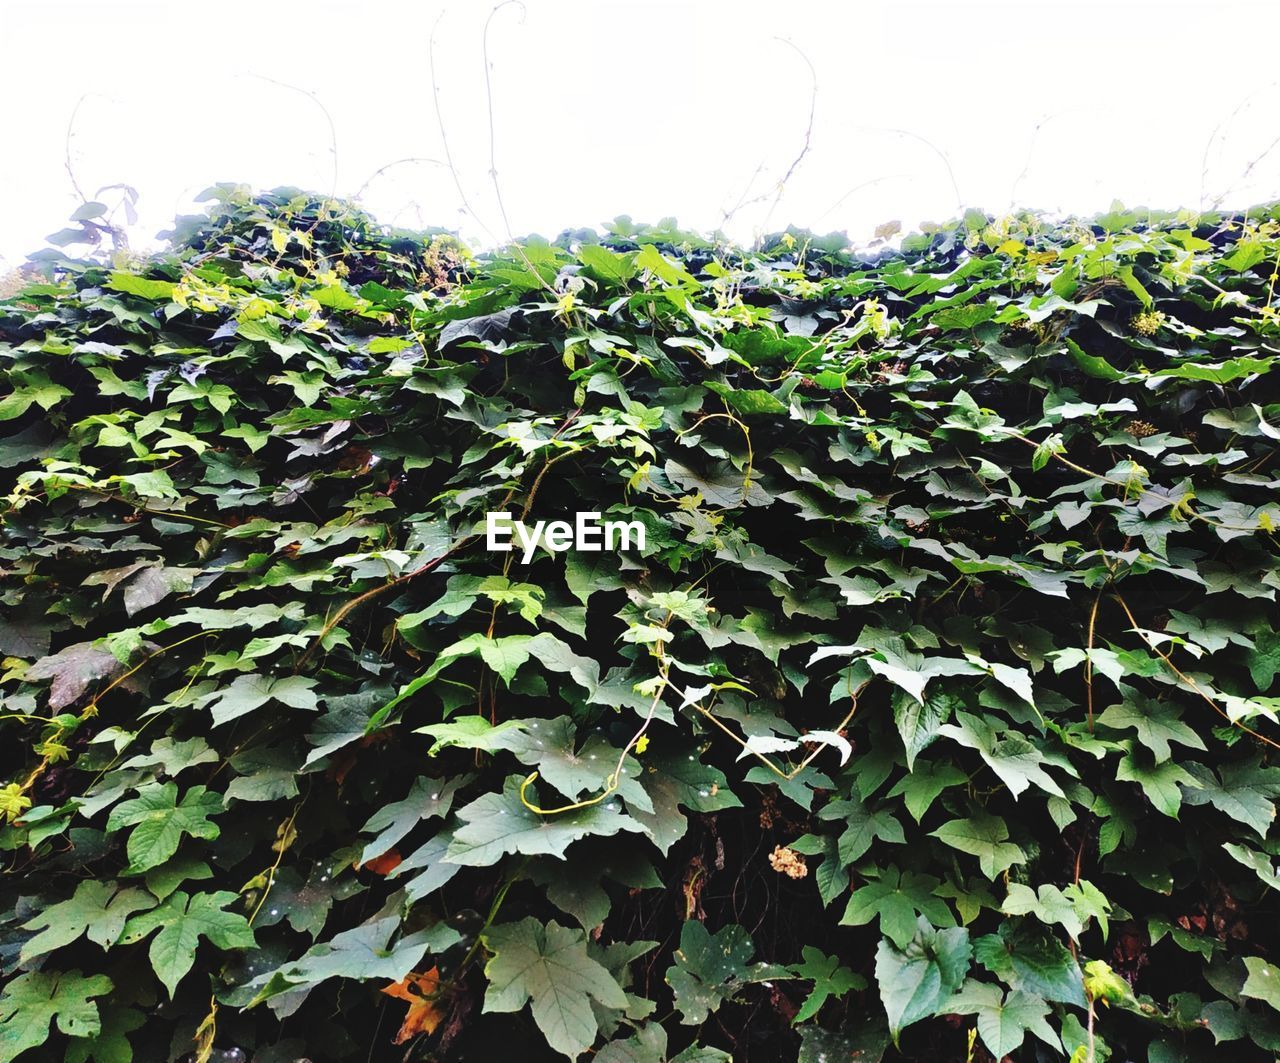 CLOSE-UP OF IVY GROWING ON PLANT